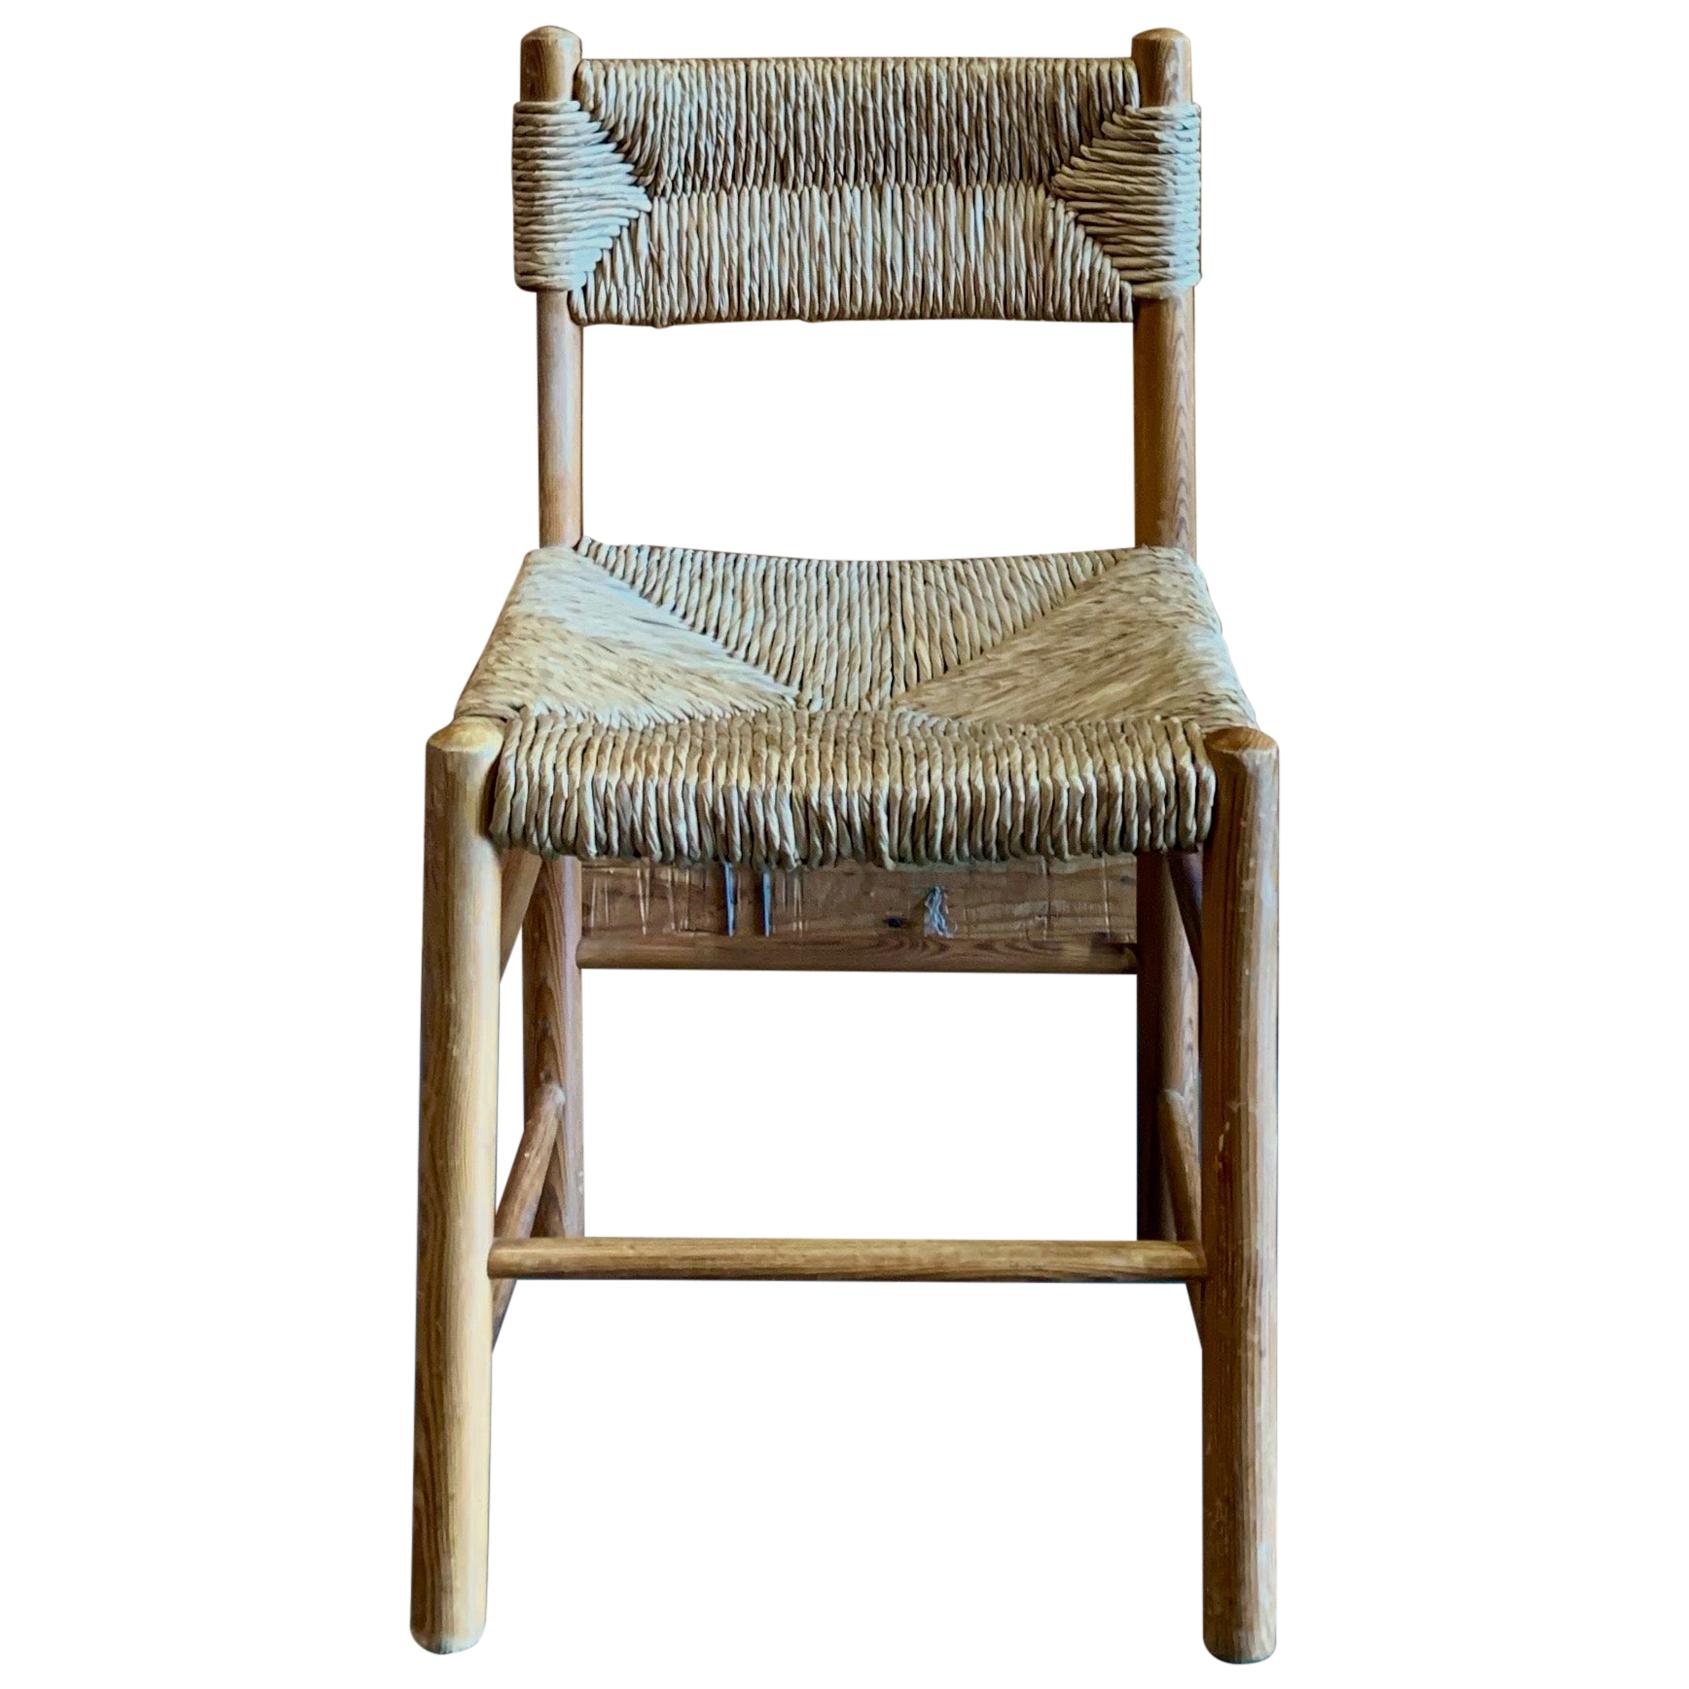 Light Brown Charlotte Perriand Chair